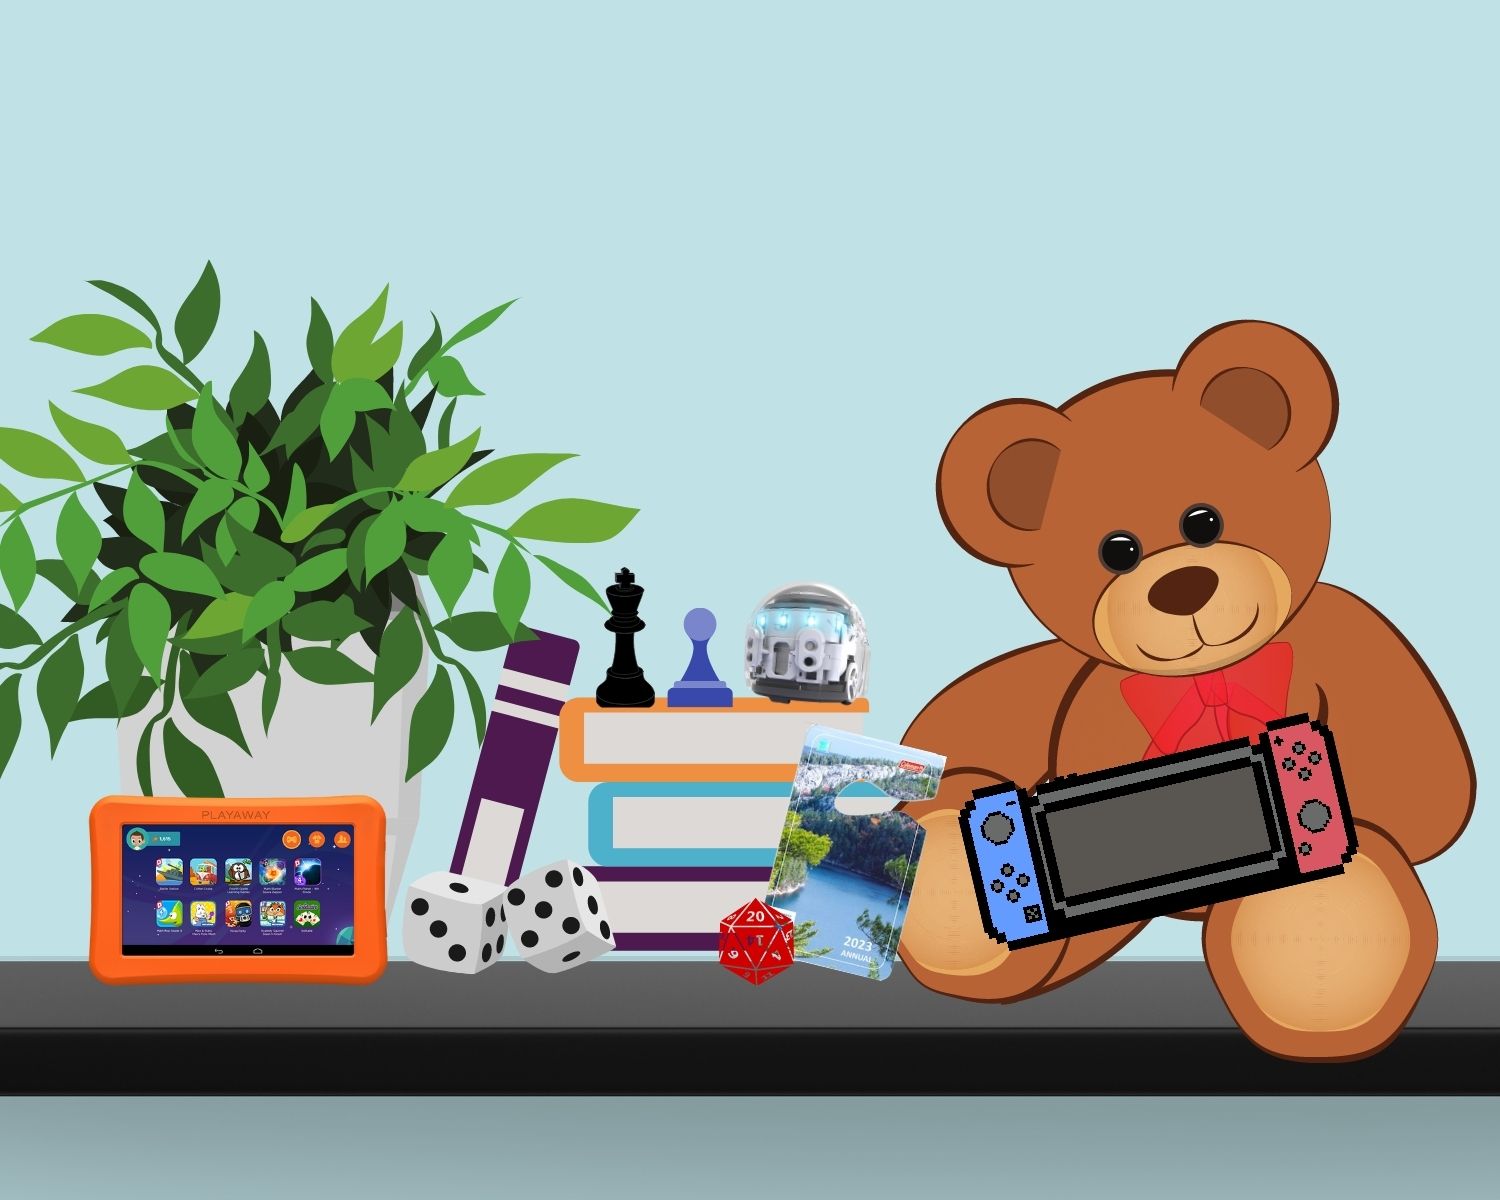 A graphic of an array of items (plant, teddy bear, launchpad tablet, books, die, game board pieces and a Nintendo Switch console set on a shelf